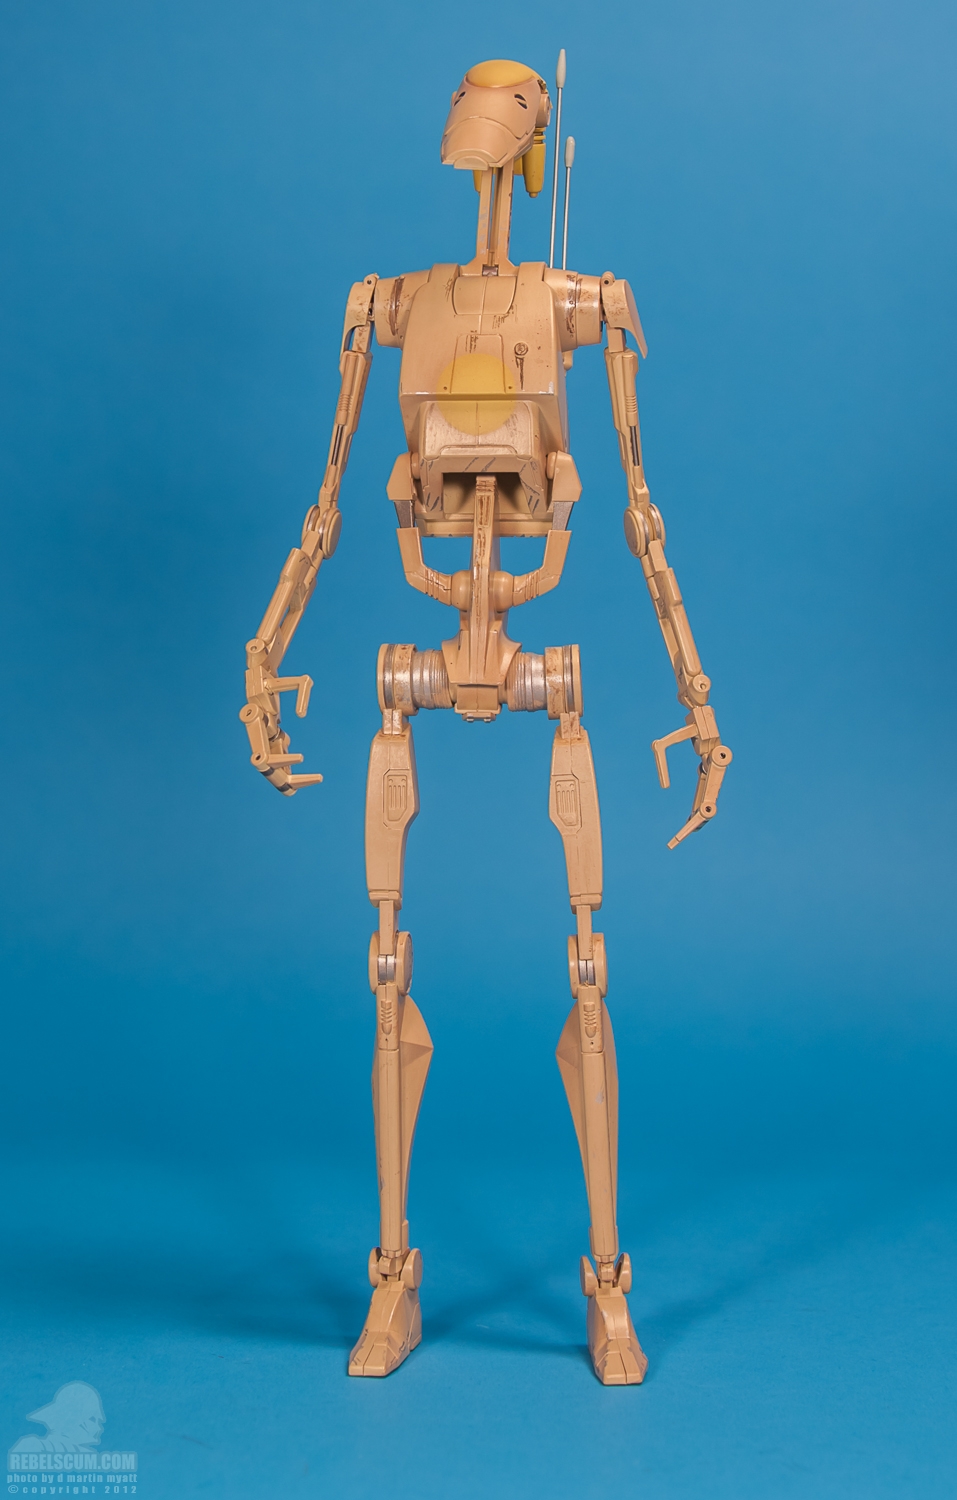 OOM-9_Battle_Droid_Commander_Sideshow_Collectibles-01.jpg